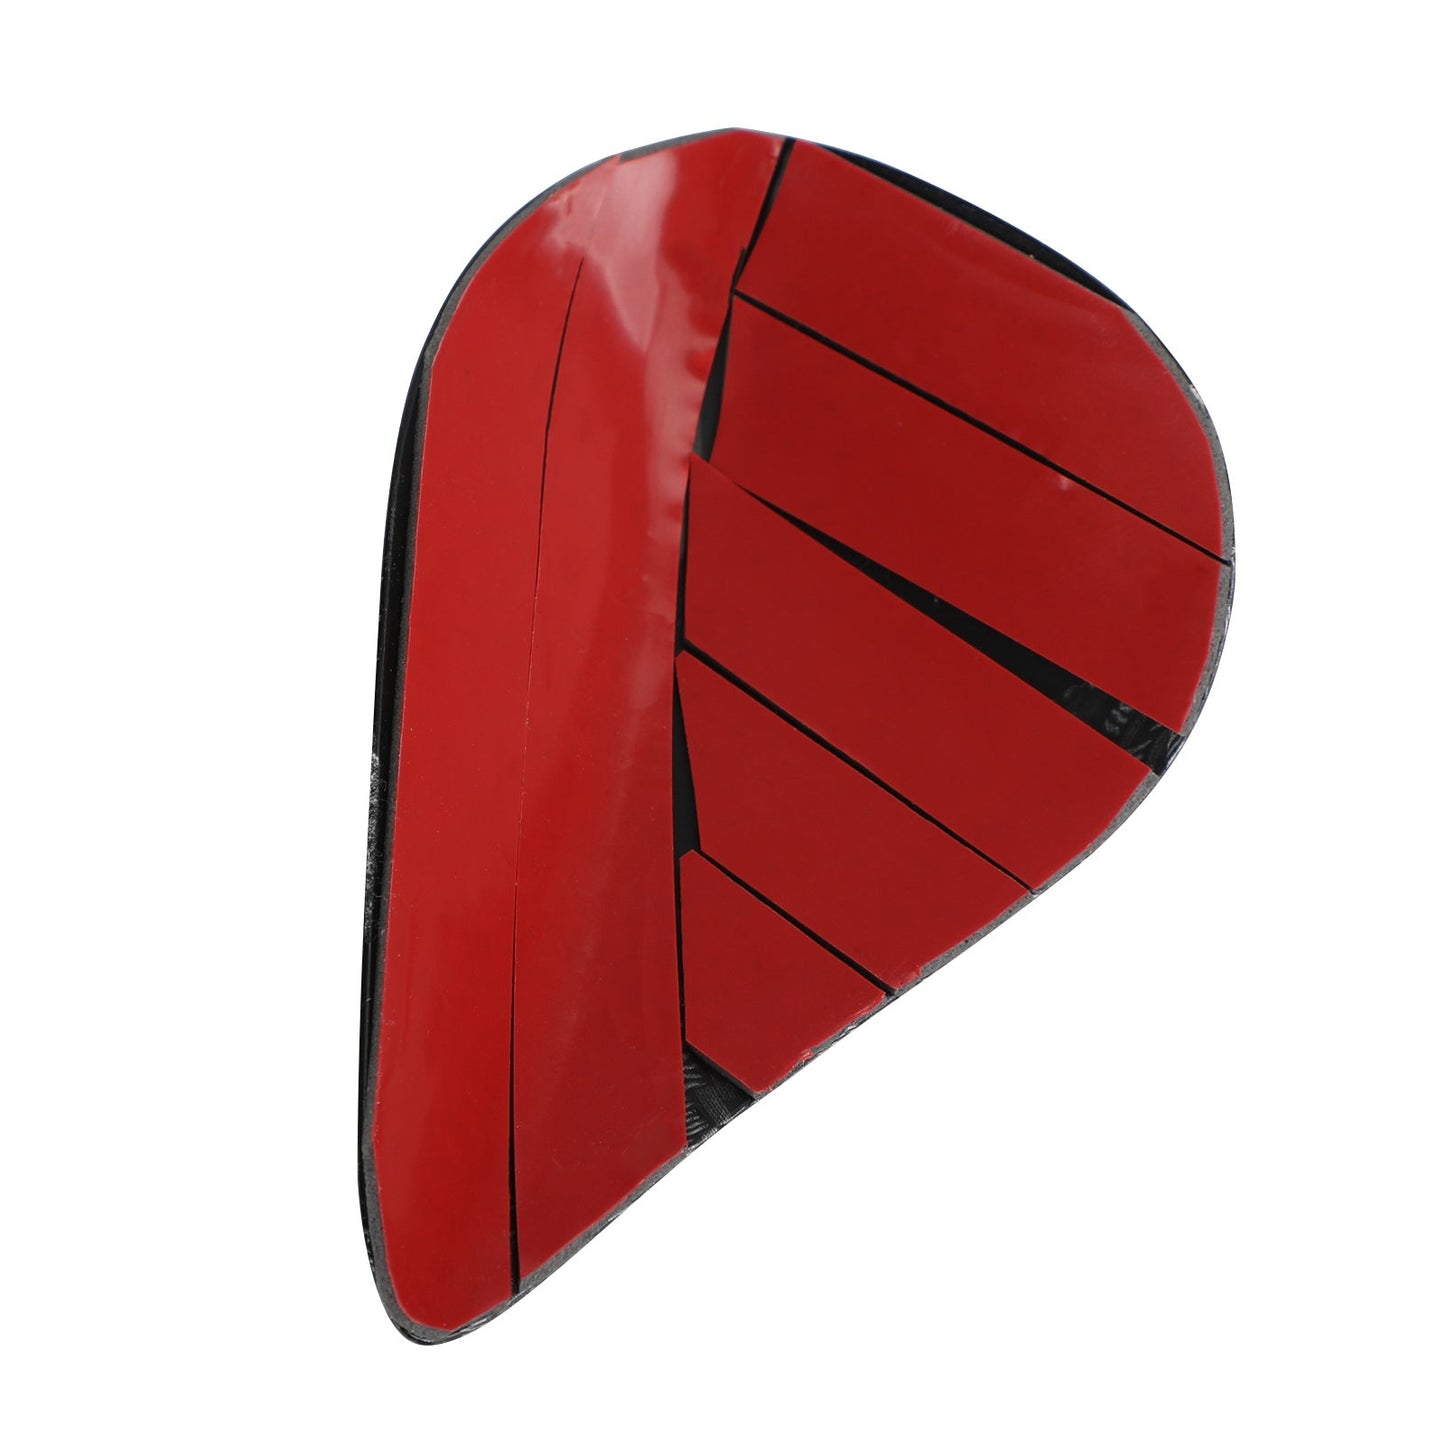 Gas Tank Side Trim Cover Panel For DUCATI Panigale 899 959 1199 1299 All Year